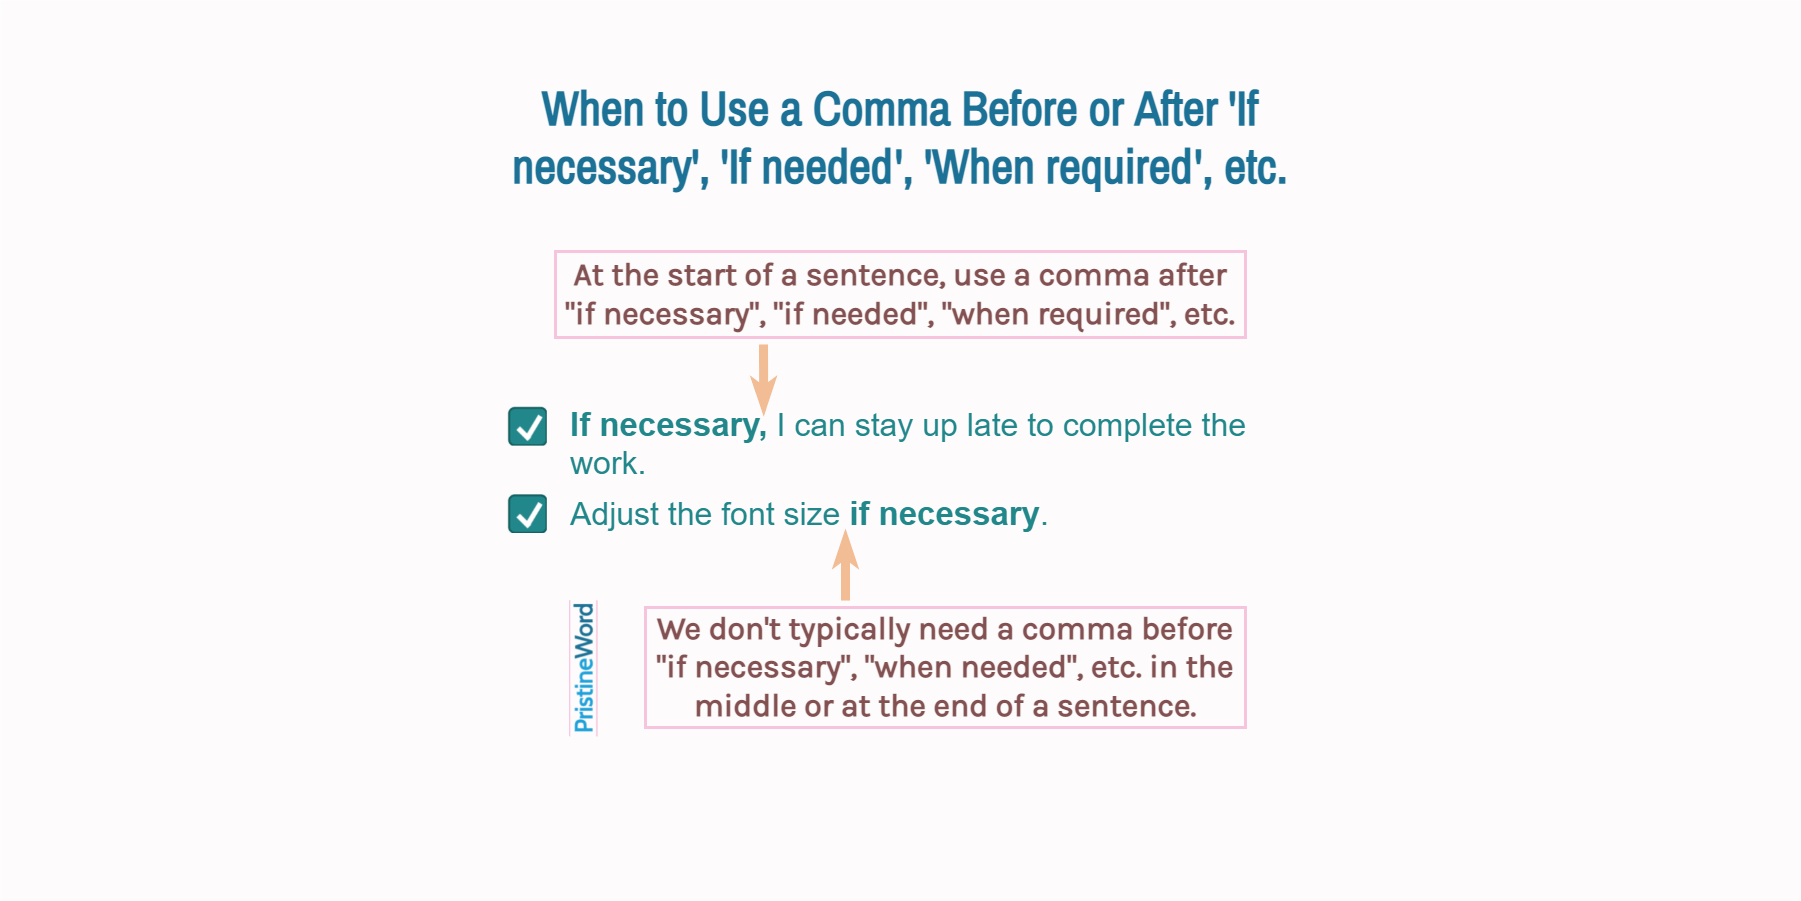 Comma Use with 'If necessary', 'If required', 'When needed', etc.